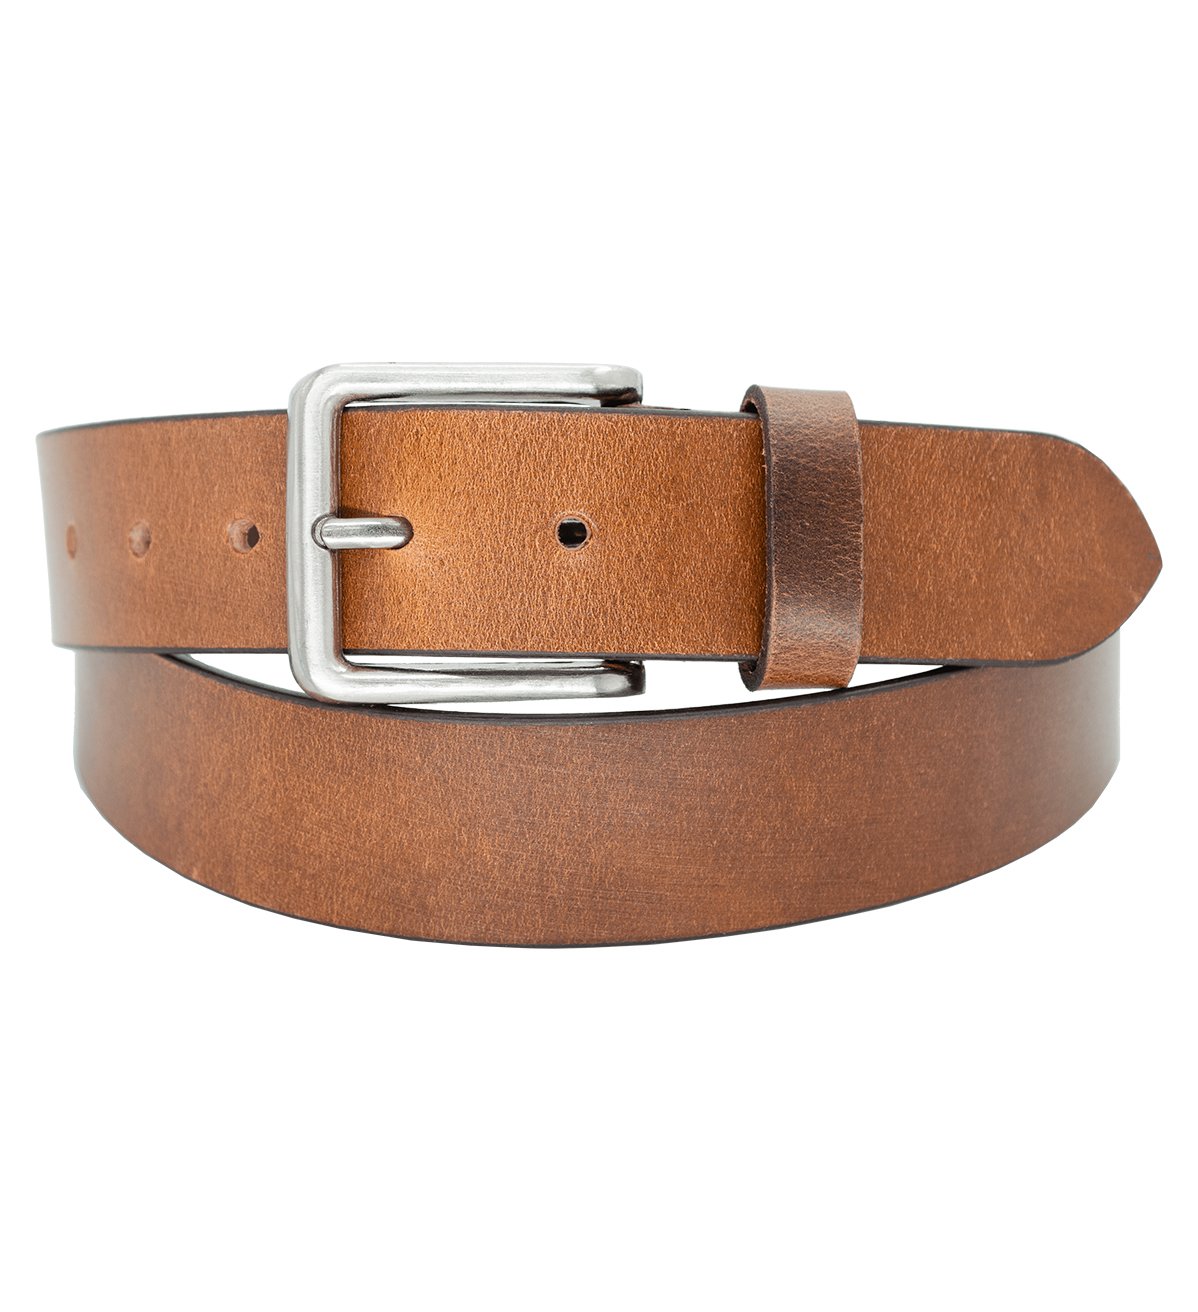 Men's Formal Genuine Leather Belt with Heavy Silver Buckle - #BT-1511